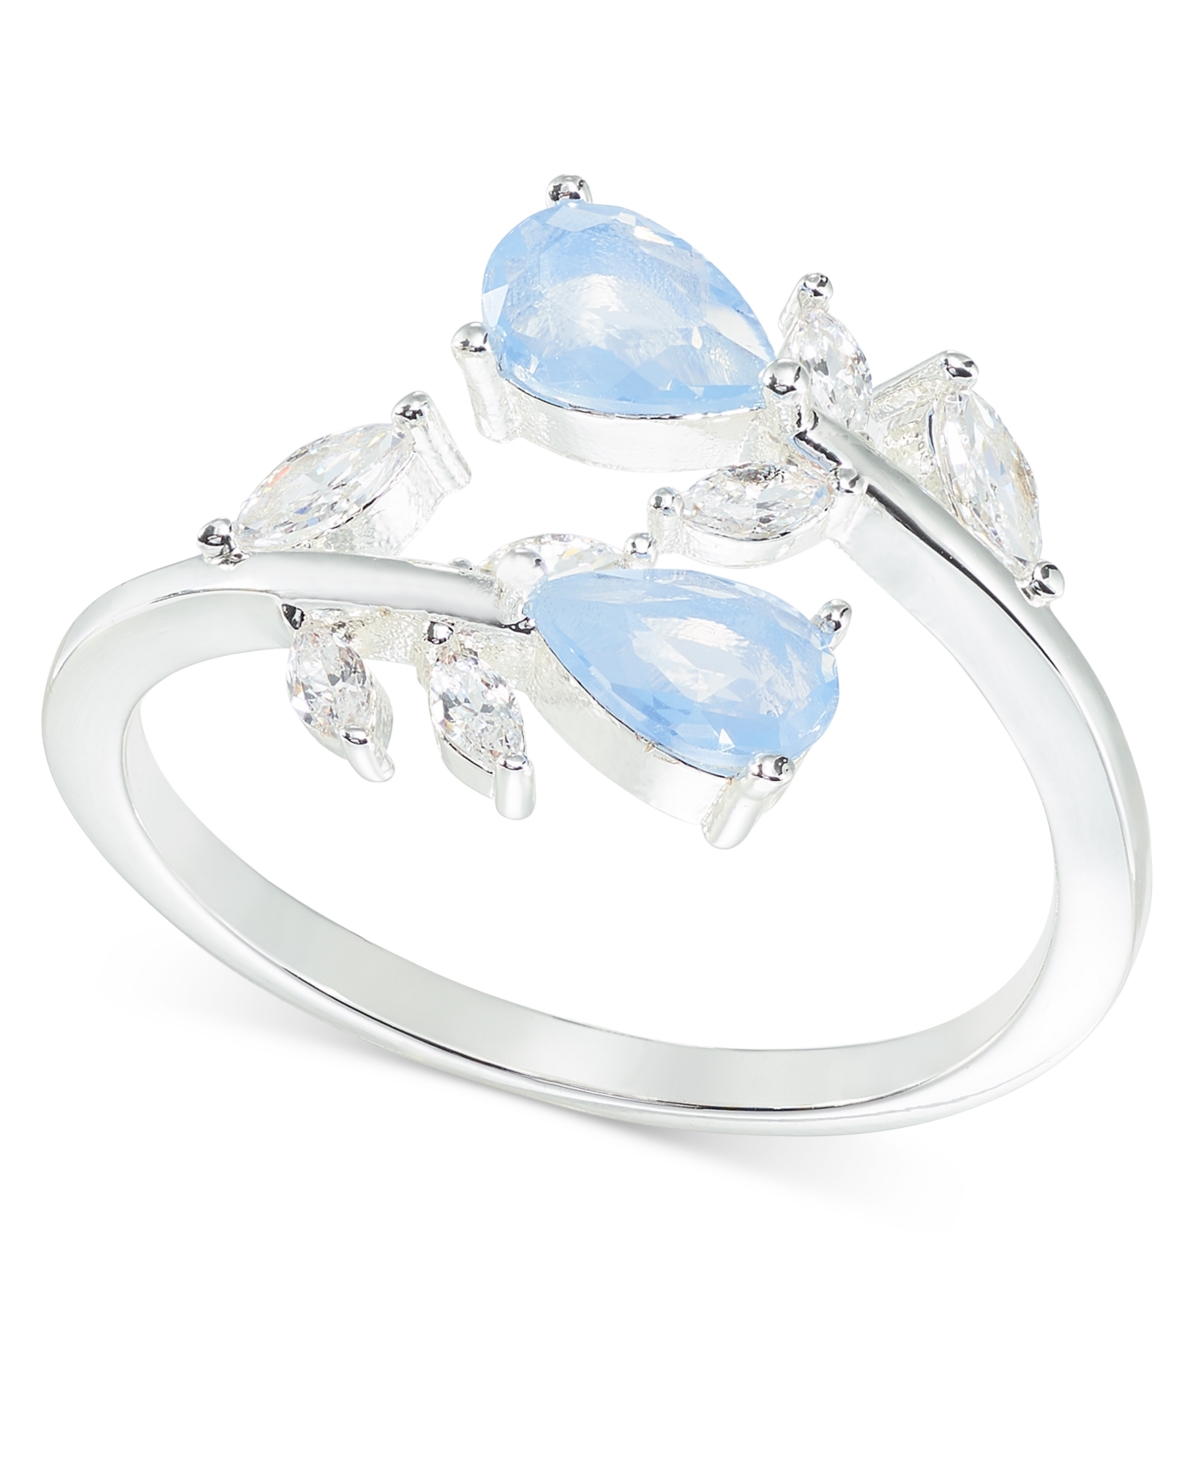 Silver-Tone Blue Crystal & Cubic Zirconia Bypass Ring, Created for Macy's - Silver